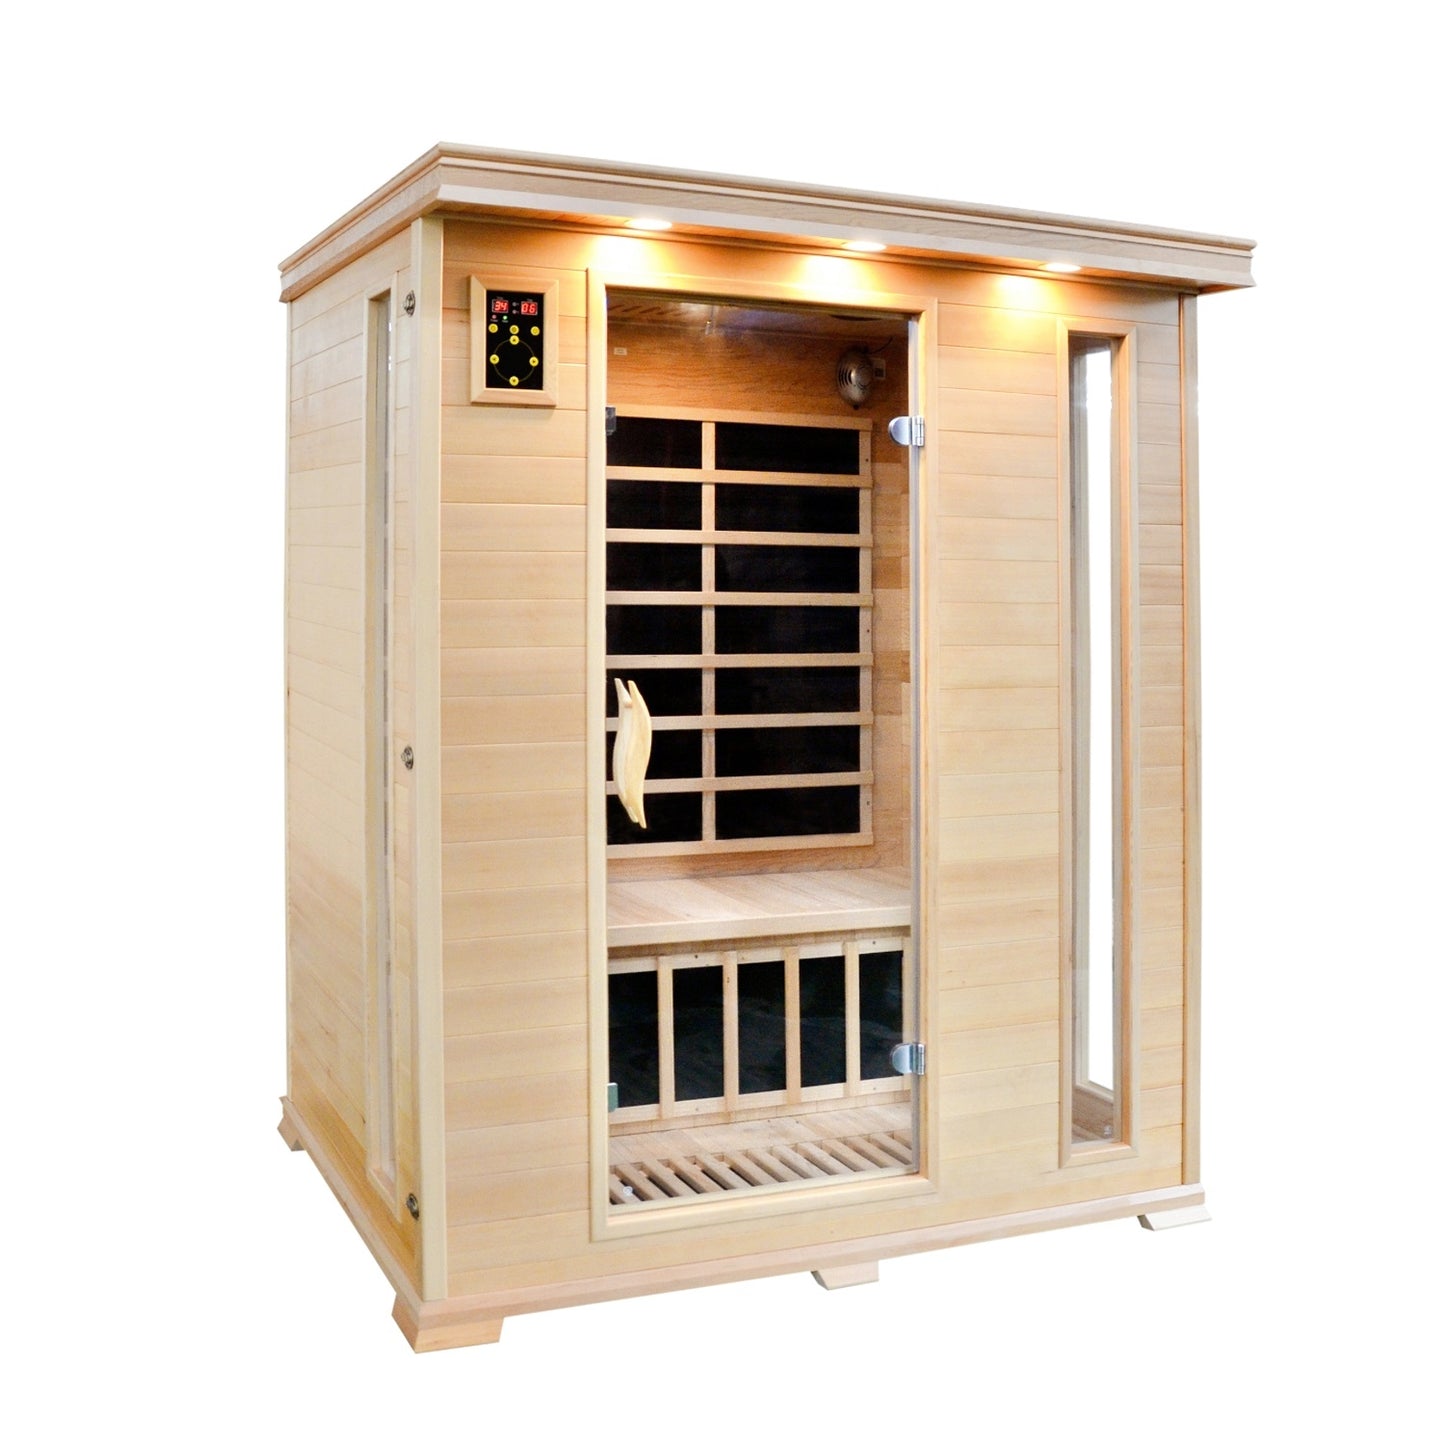 Pre-order Luxury Carbon Fibre Infrared 3 Person Sauna 9 Heating Panels 2190W